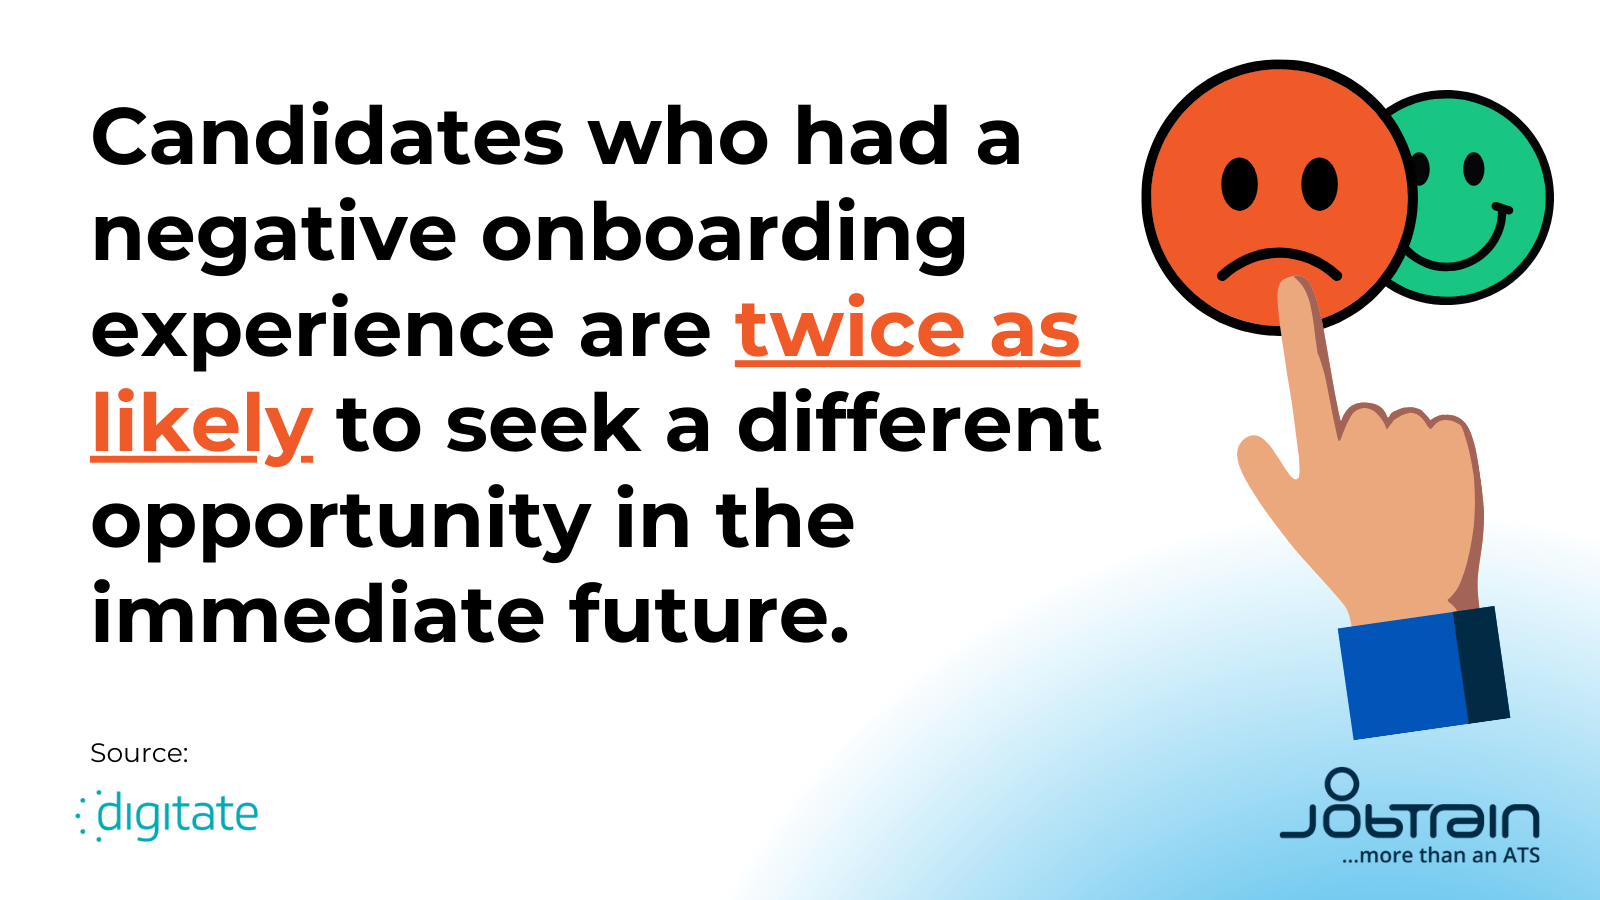 Candidates who had a negative onboarding experience are twice as likely to seek a different opportunity in the immediate future.